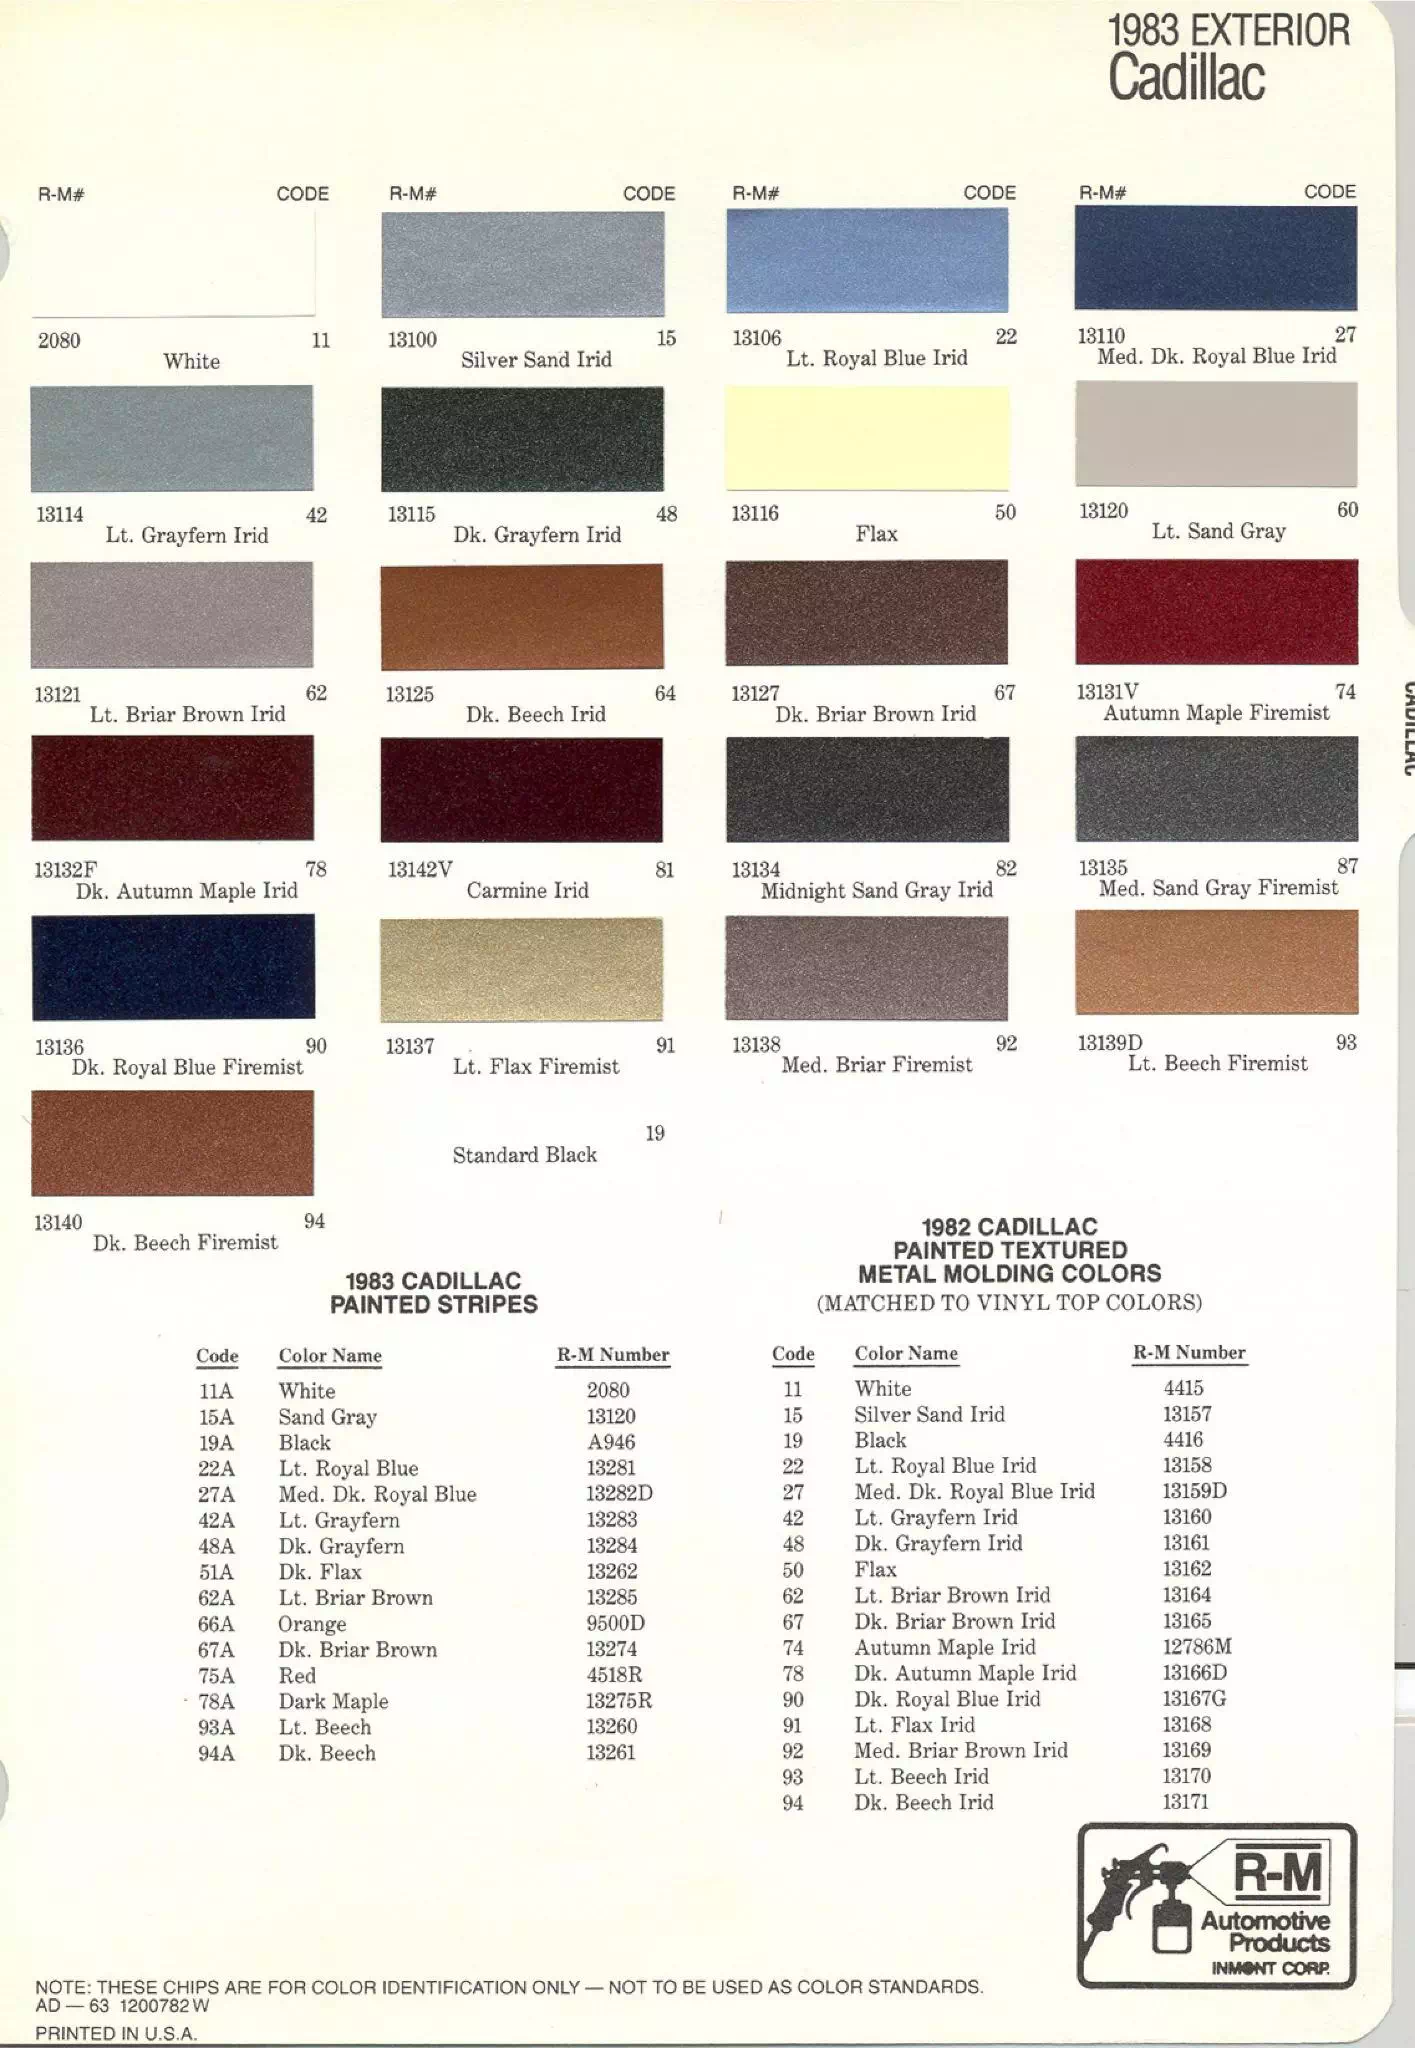 General Motors oem paint swatches, color codes and color names for 1983 vehicles.